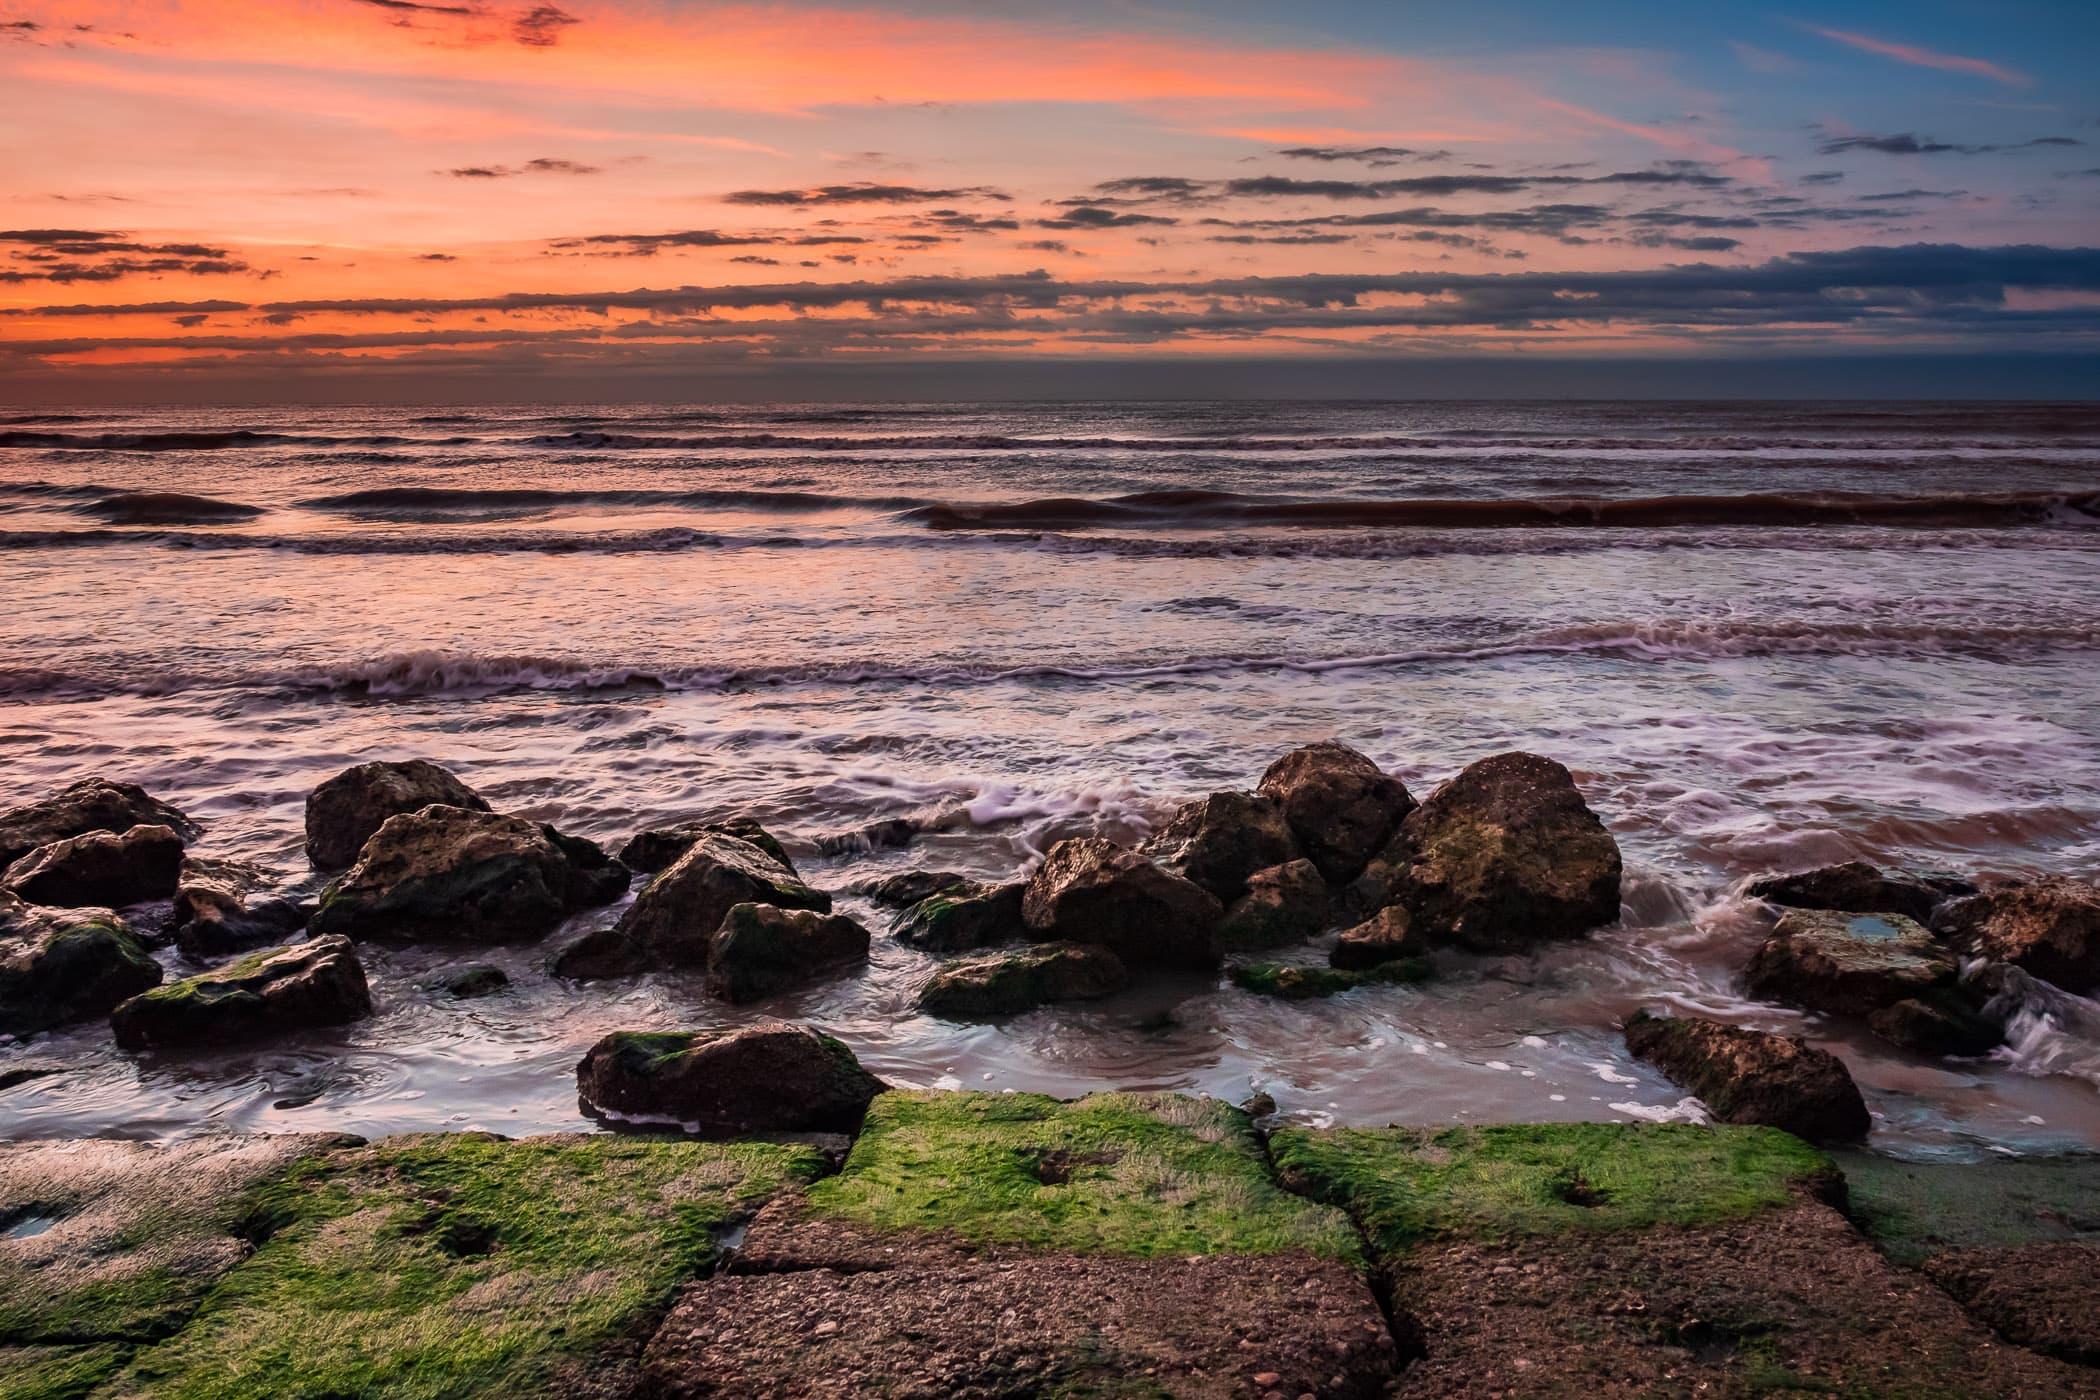 The first light of day hits granite blocks along the beach at the base of the Galveston Seawall, Galveston, Texas.